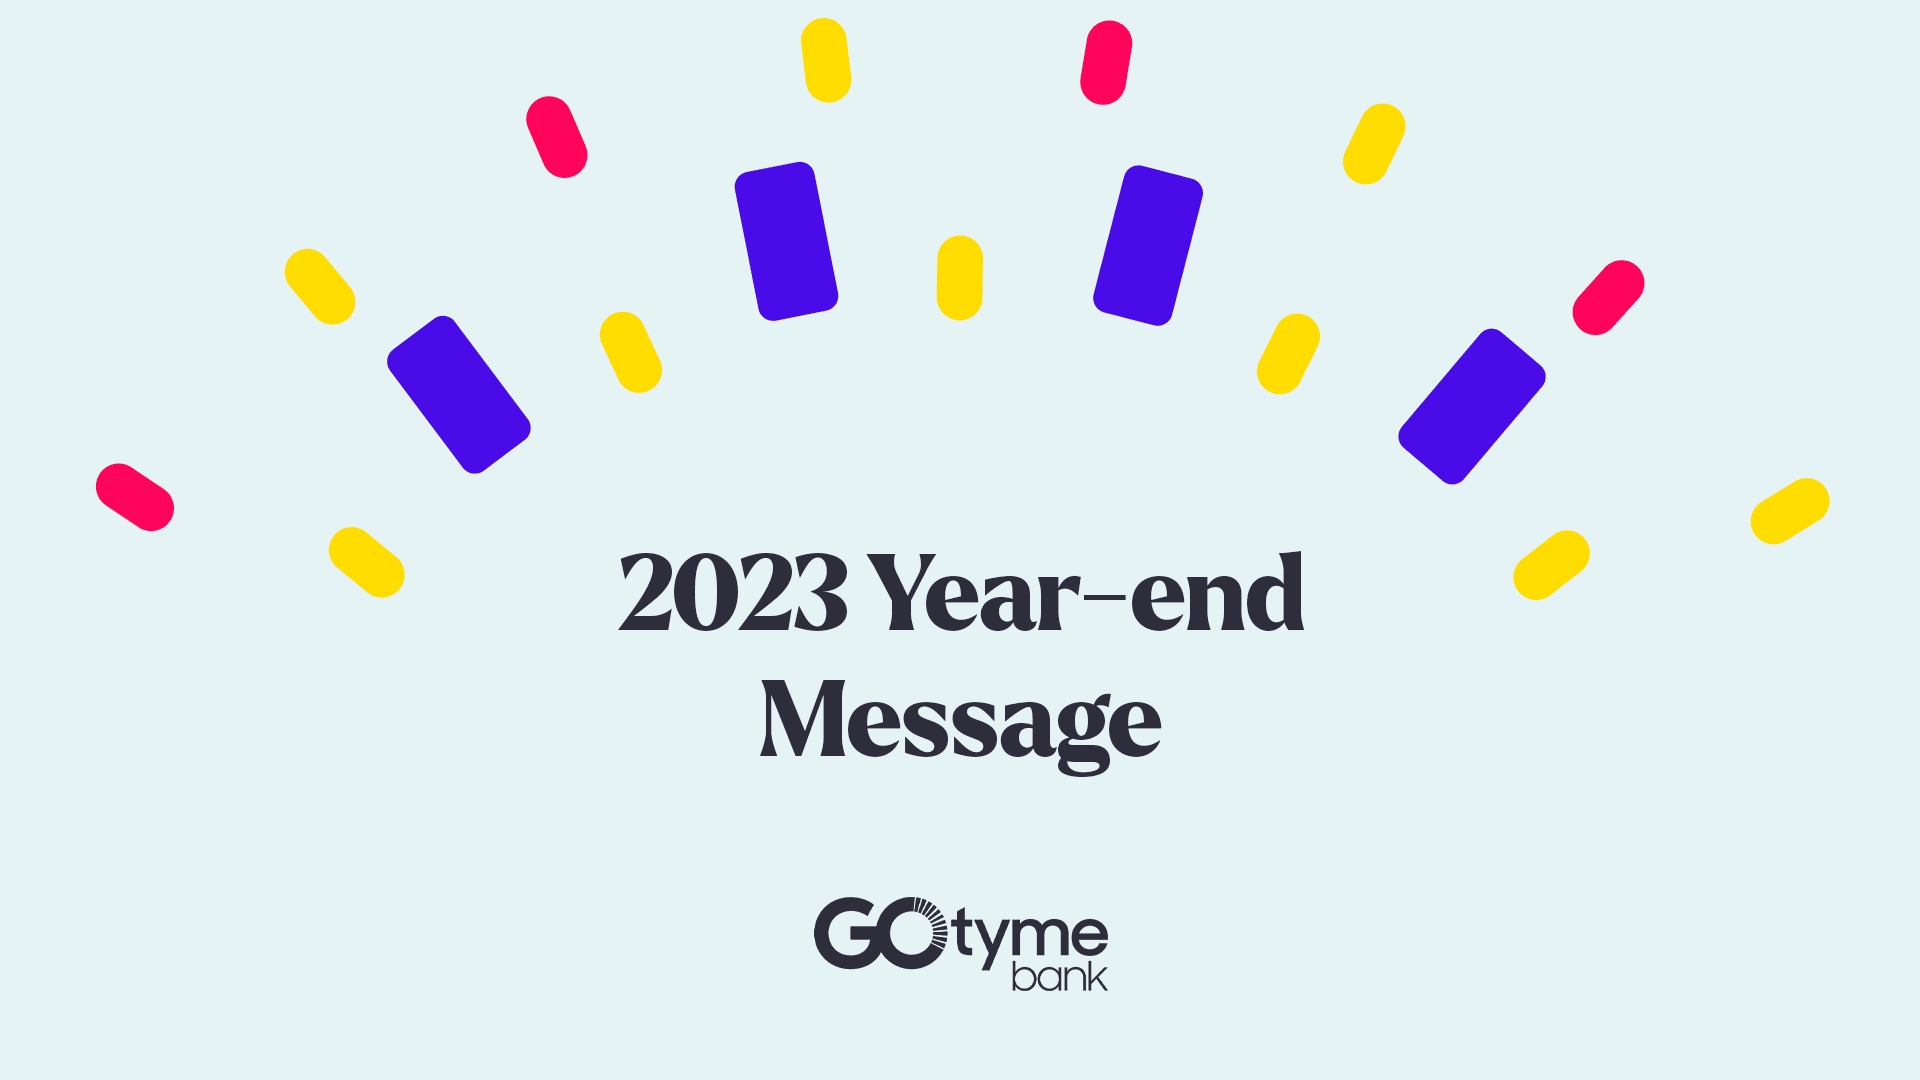 2023 Year-end Message from GoTyme Bank